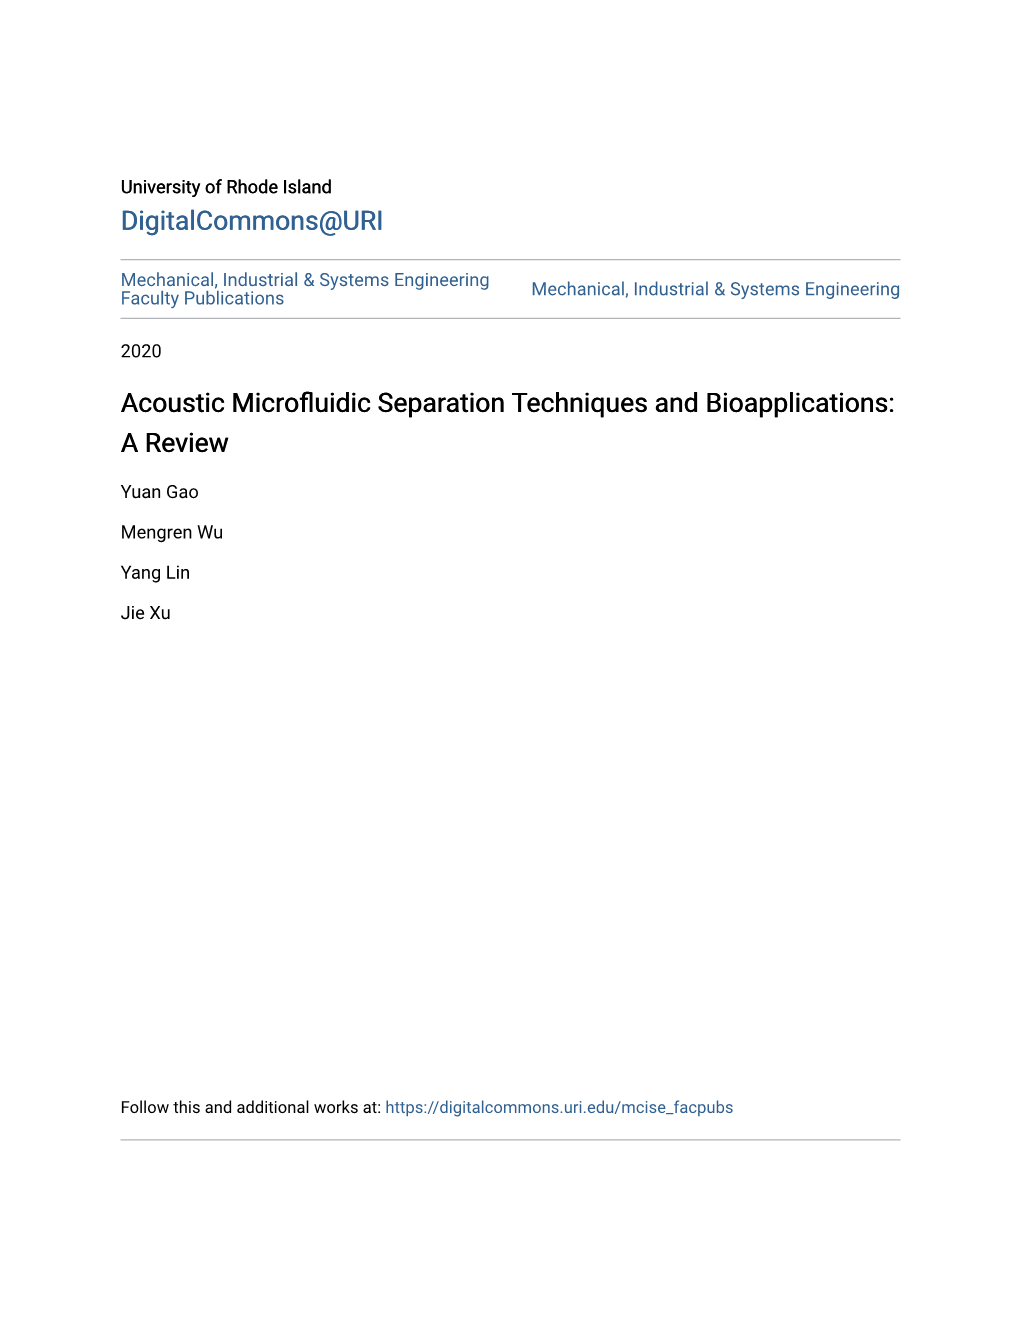 Acoustic Microfluidic Separation Techniques and Bioapplications: a Review